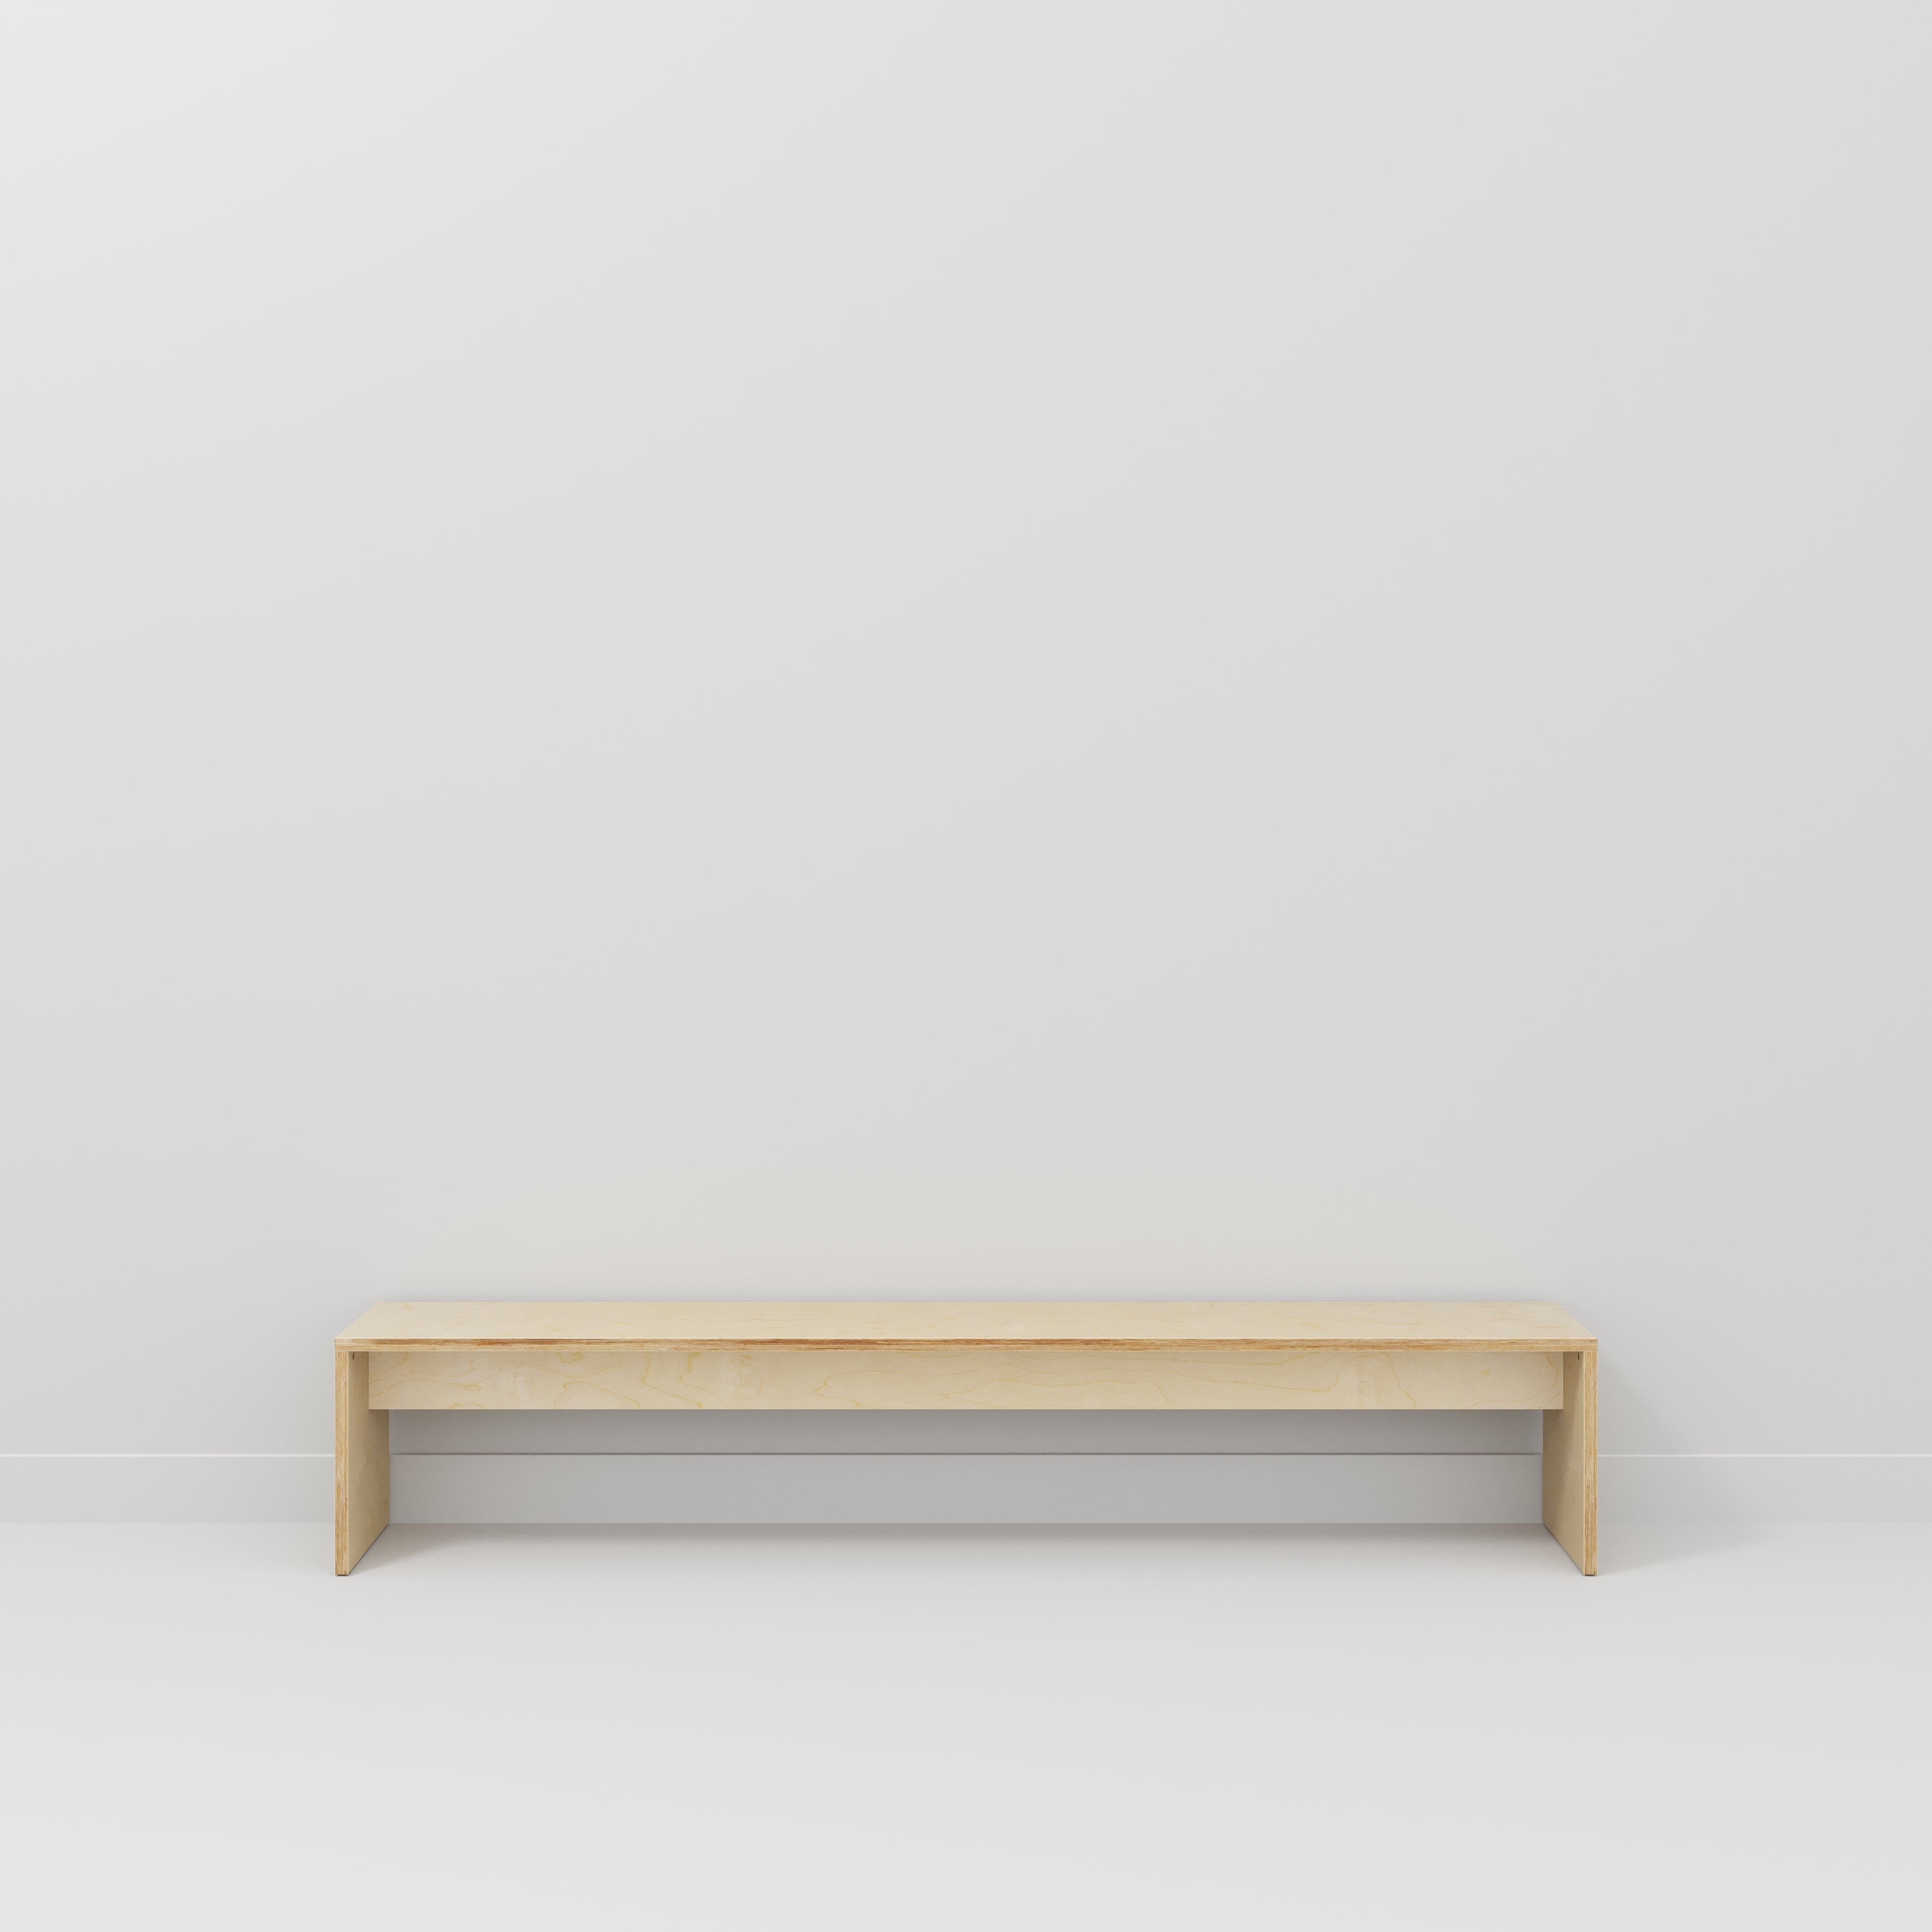 Bench Seat with Solid Sides - Plywood Birch - 2400(w) x 400(d)